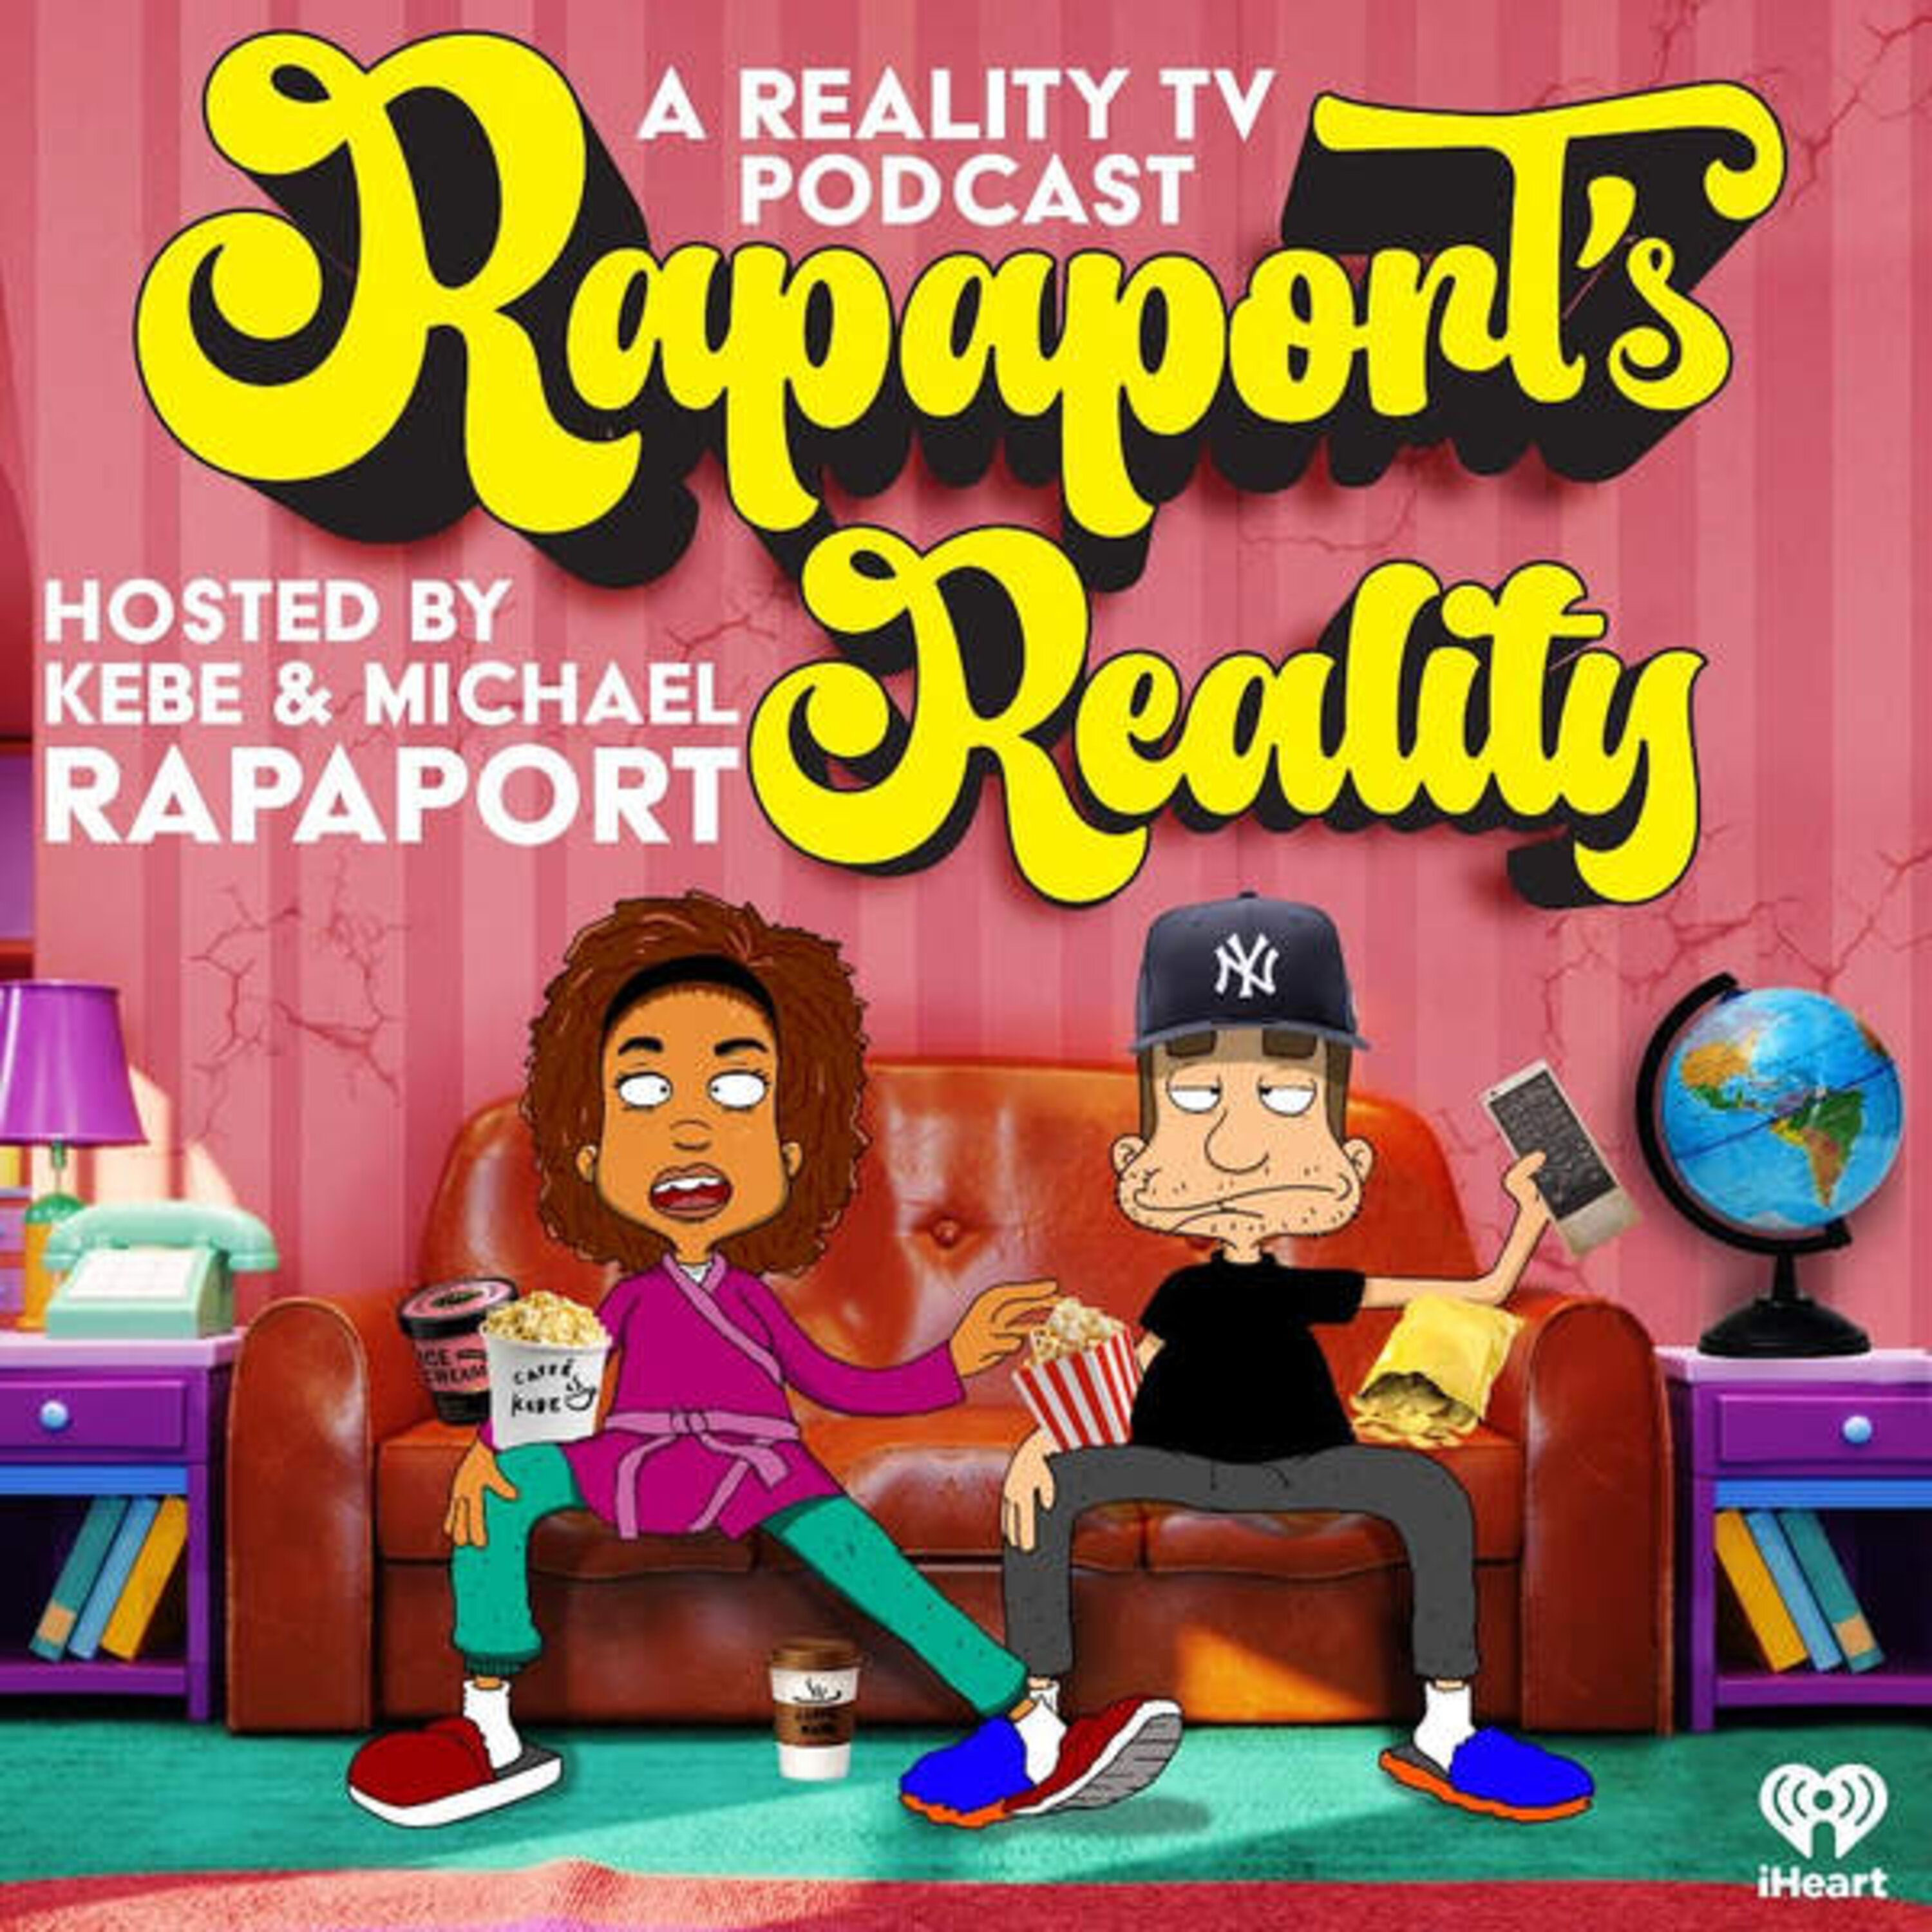 RAPAPORT'S REALITY EP 6 - PEOPLE'S MAGAZINE POWER COUPLE PROFILE ON THE RAPAPORT'S/SANDOVAL PODCAST INVITE/FIRED & HIRED/WHEN IS TOM TOM OPEN?